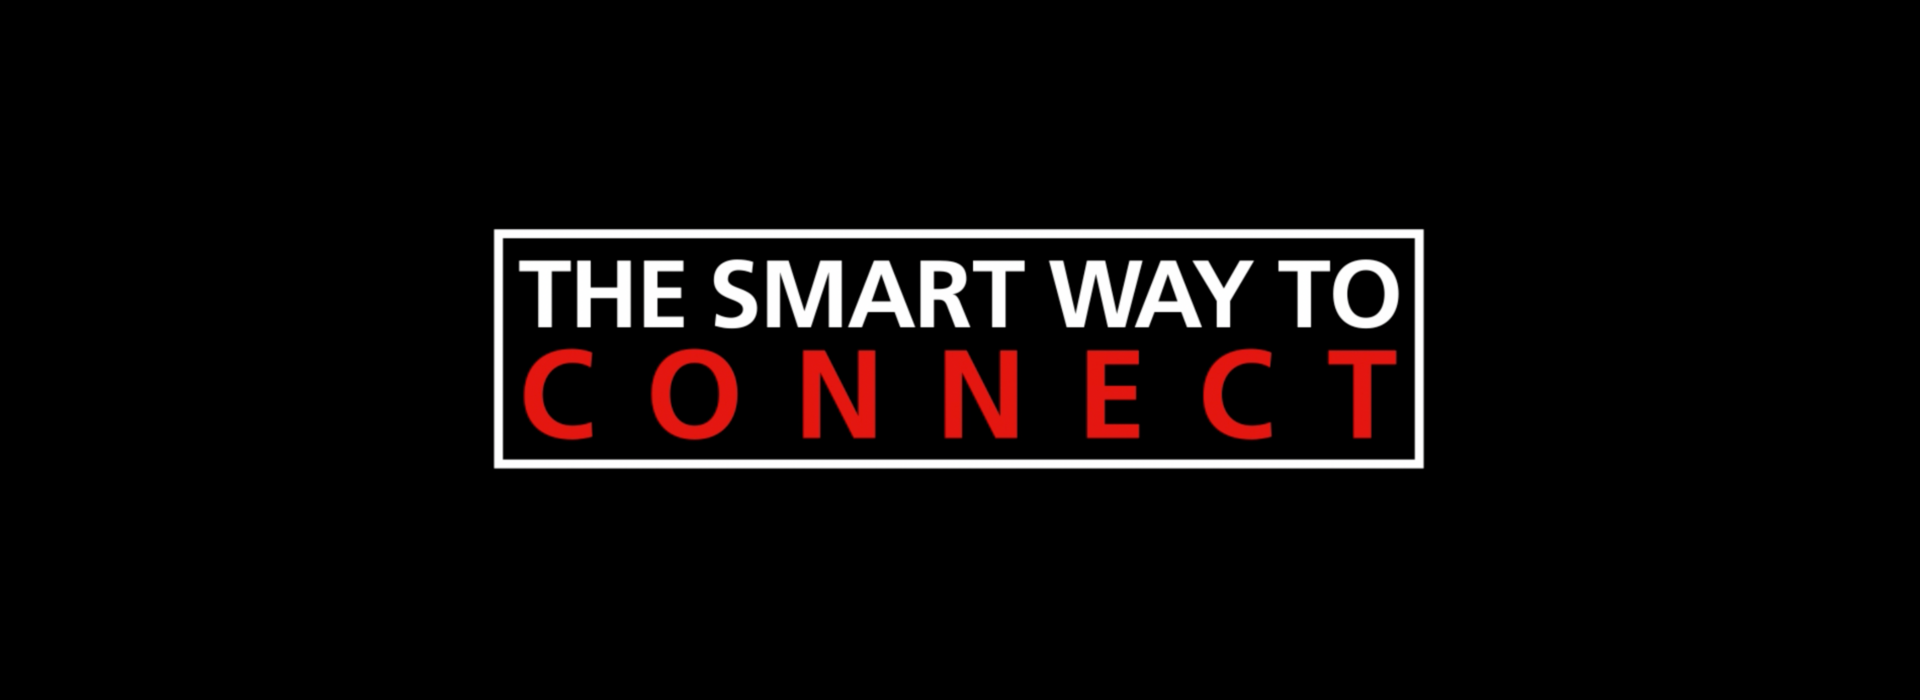 The Smart Way to Connect - Black.png